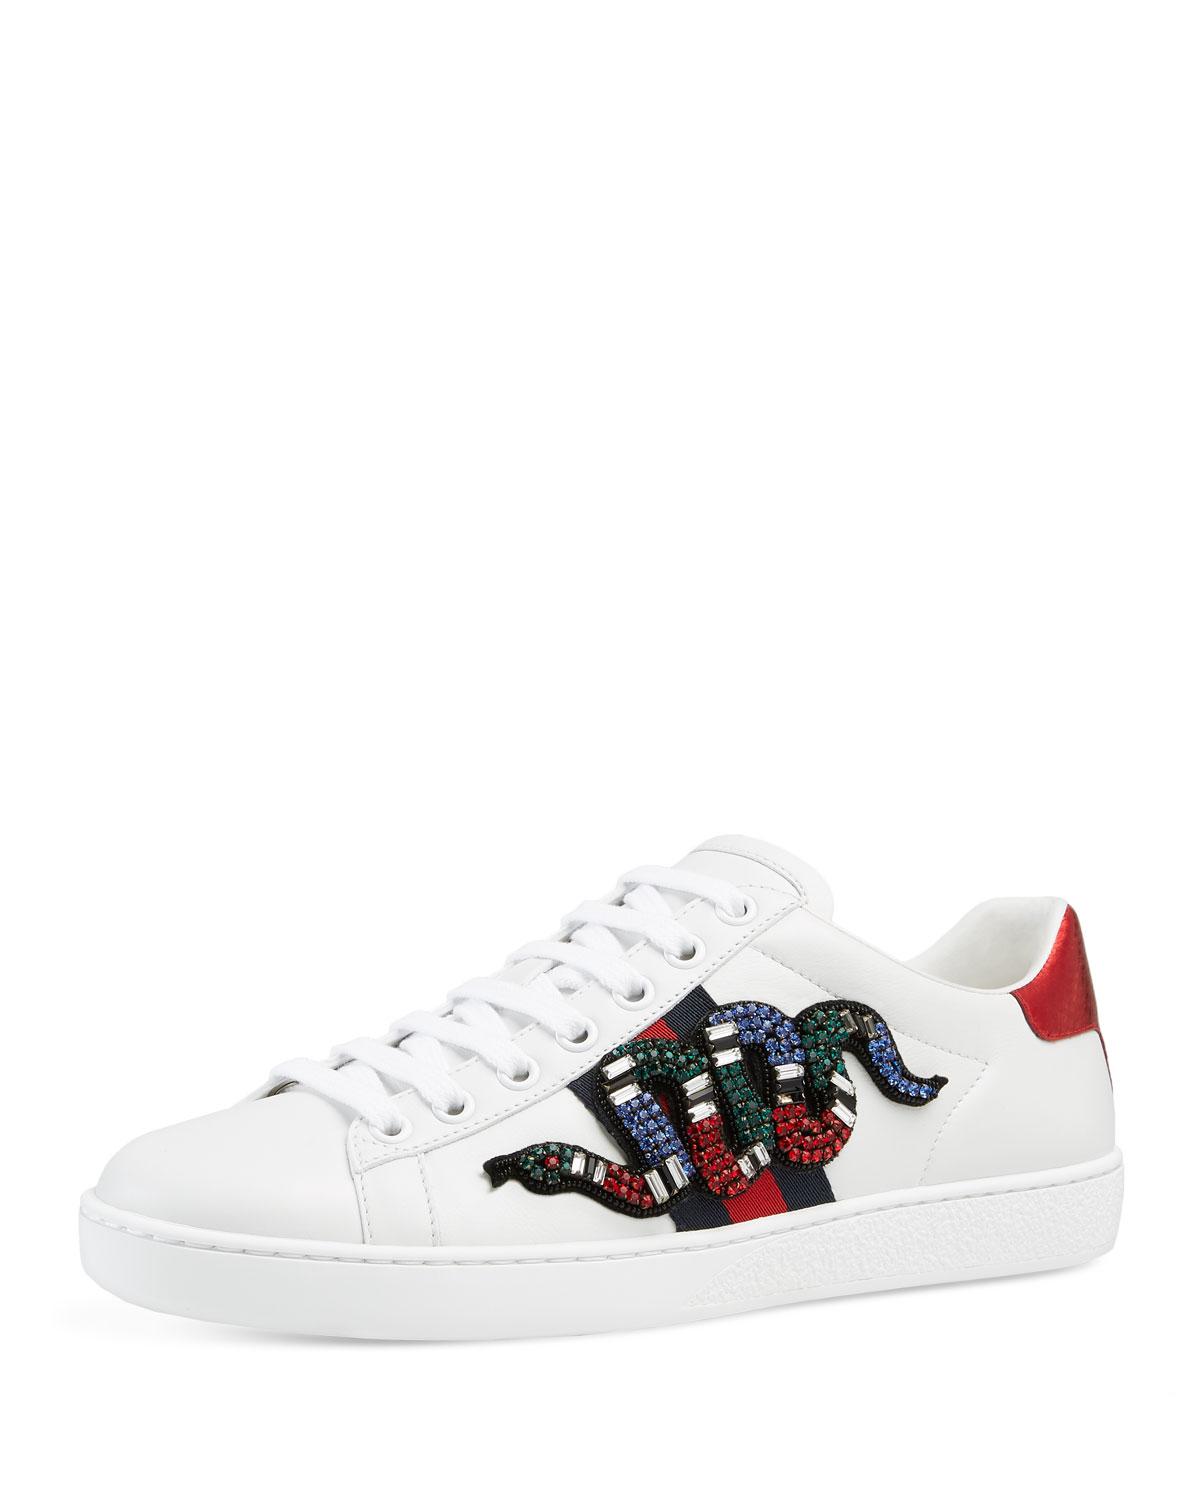 gucci mens shoes snake, OFF 71%,www 